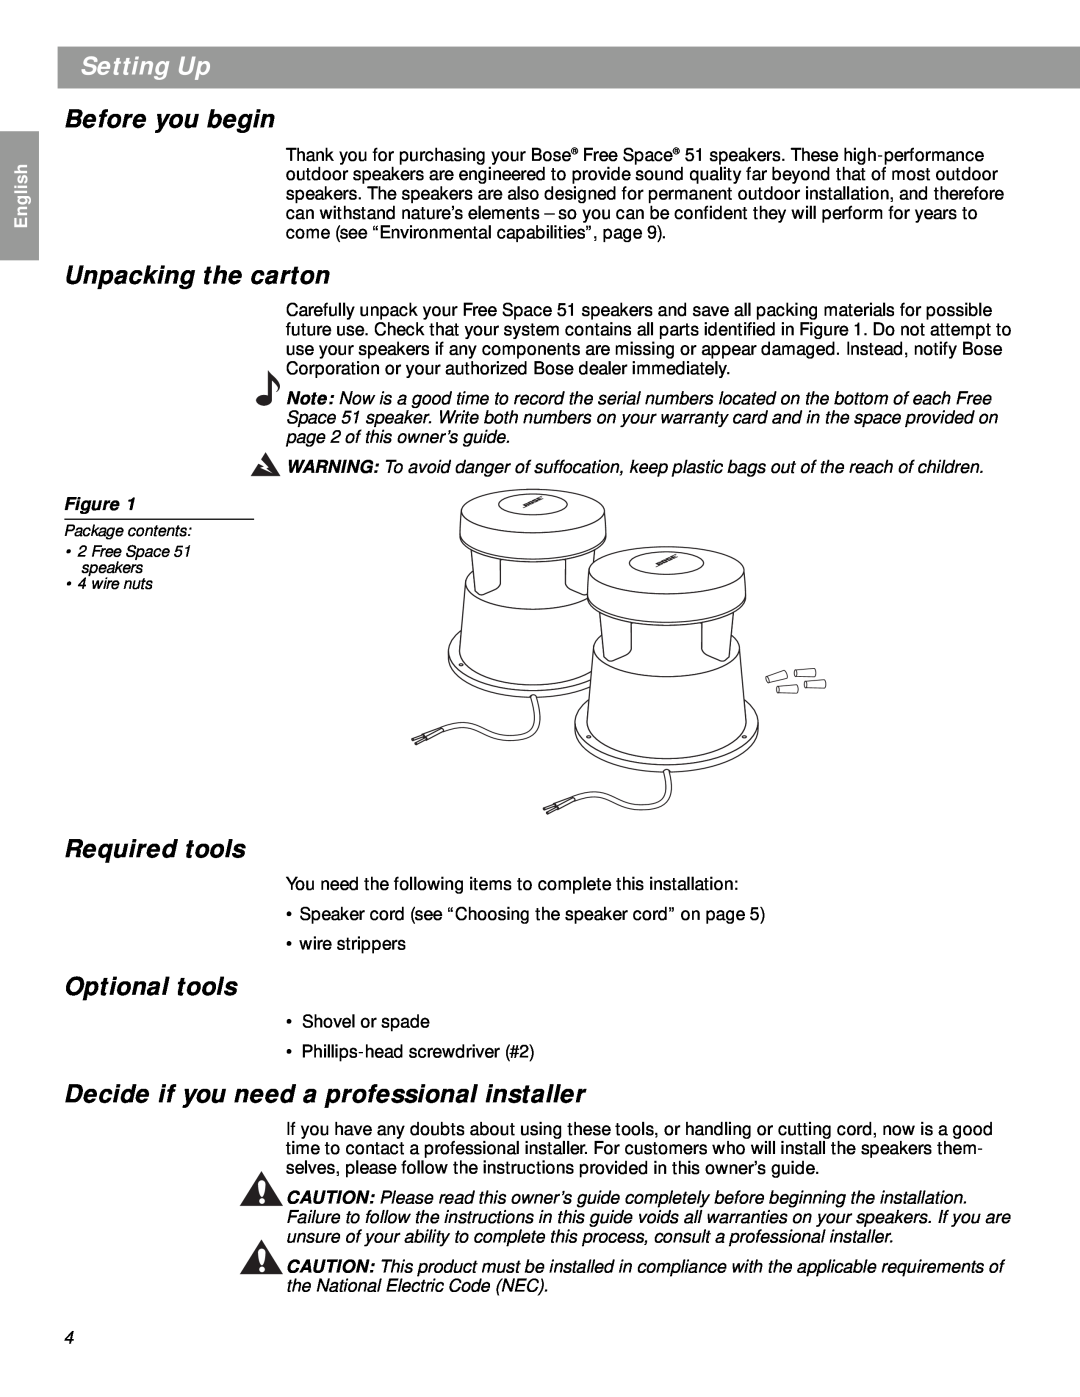 Bose 51 manual Setting Up, Before you begin, Unpacking the carton, Required tools, Optional tools, English 